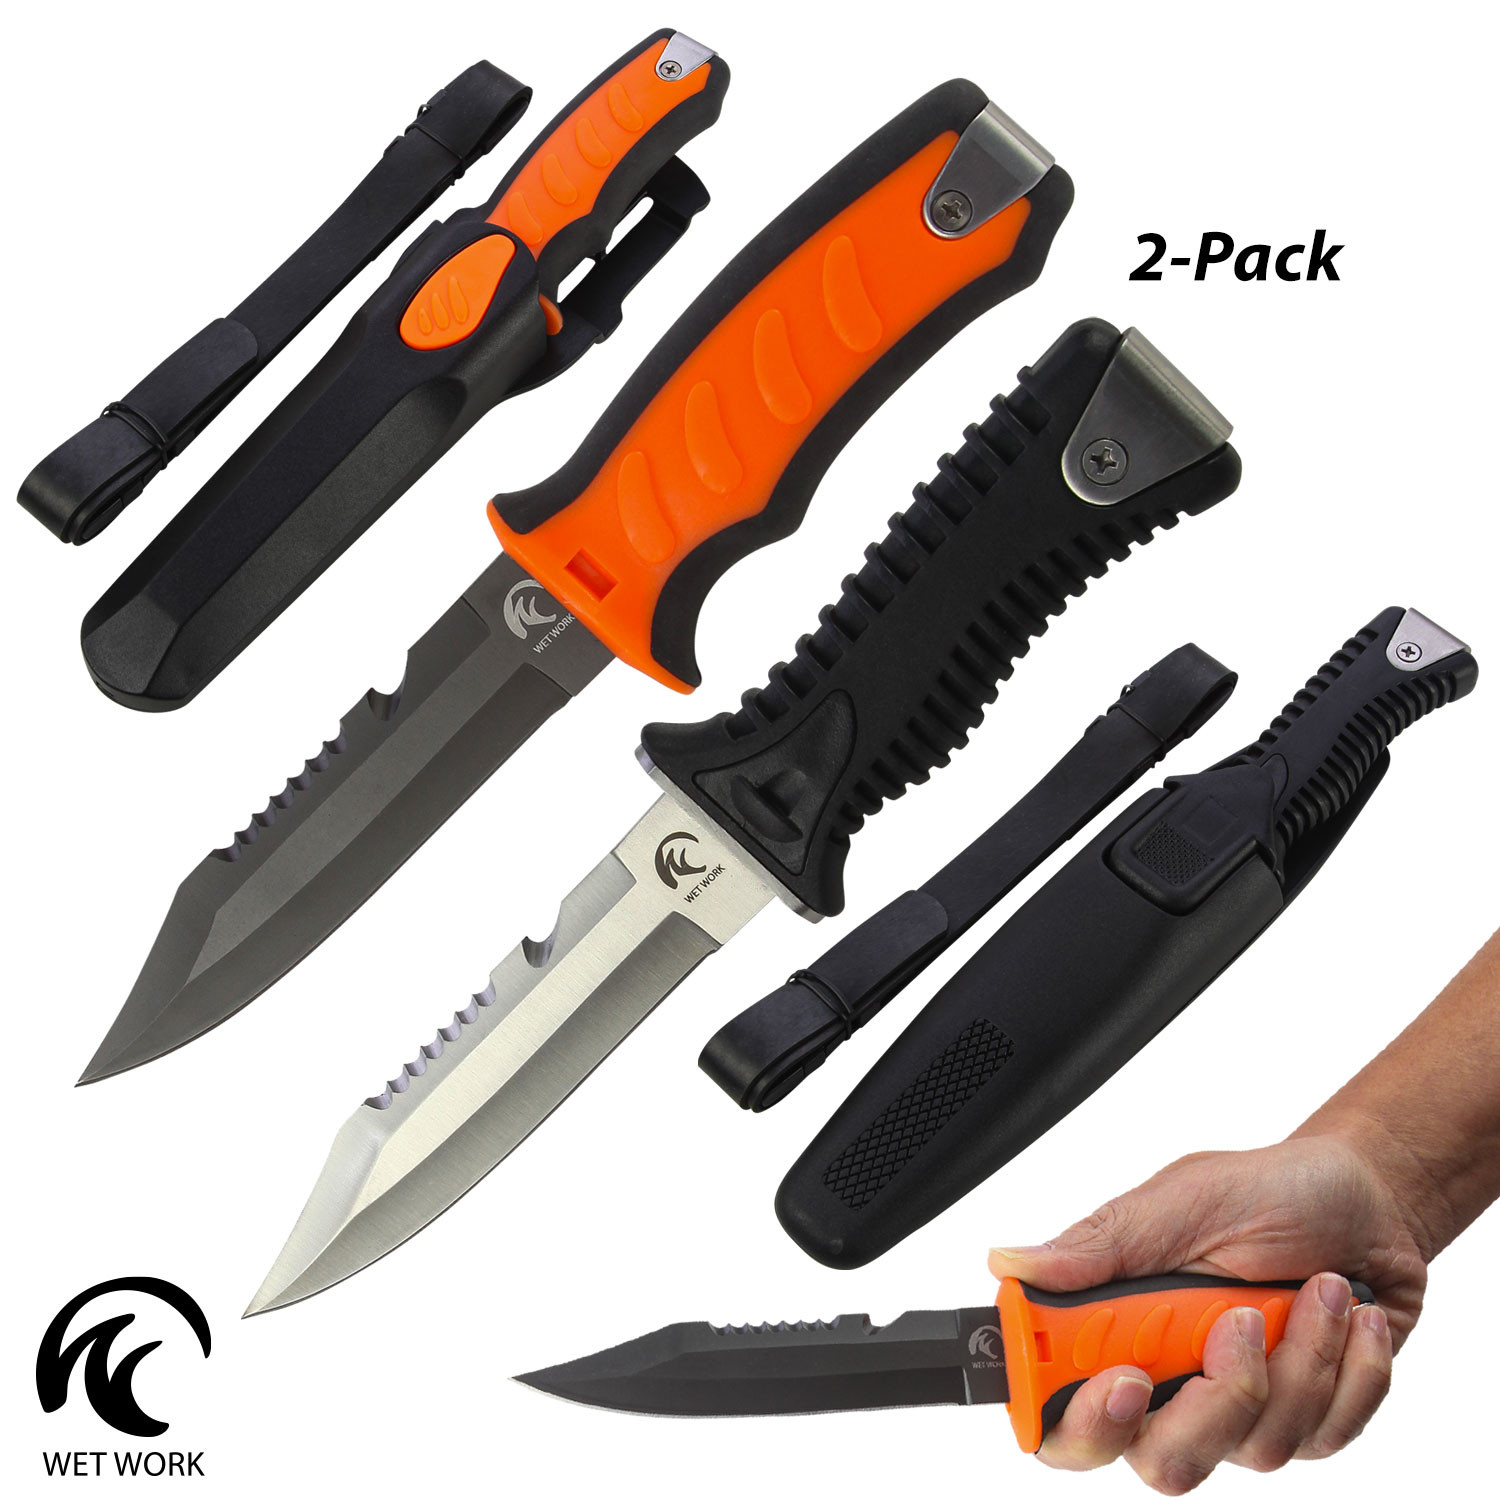 2-Pack Wet Work Partially Serrated Fixed Blade Dive Knife w/Sheath Combo (Orange/Gun & Black) $16.99 + Free Shipping